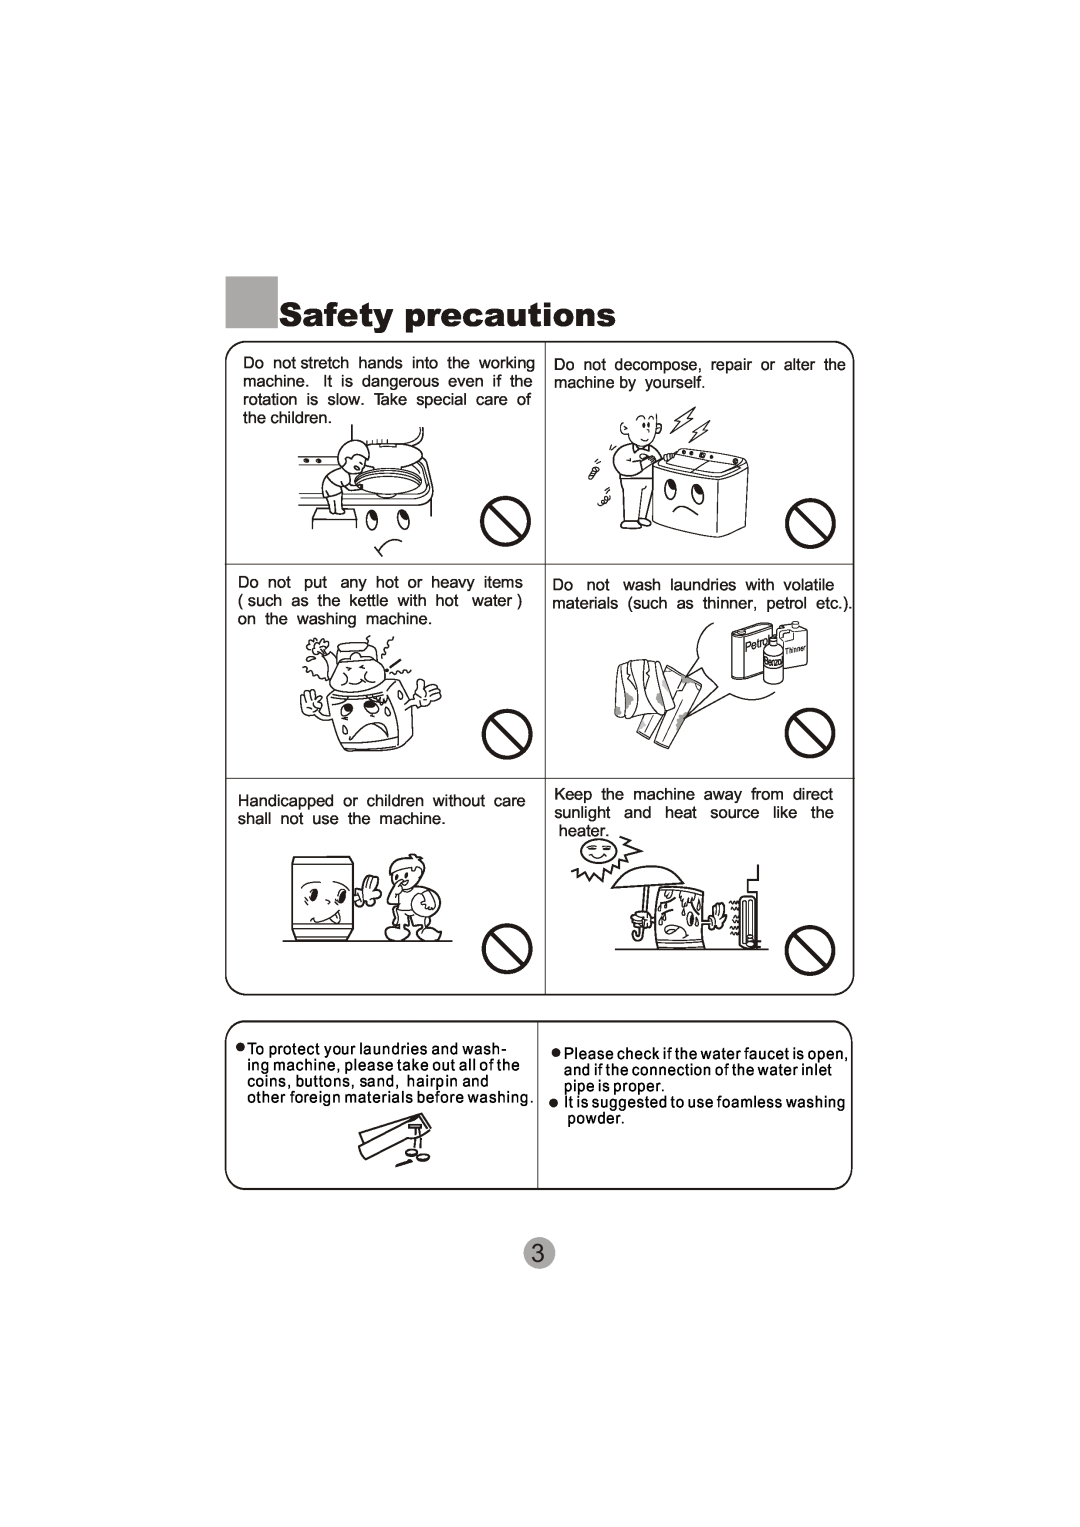 Haier XPB60-113S user manual Safety precautions, Do not decompose, repair or alter the machine by yourself 